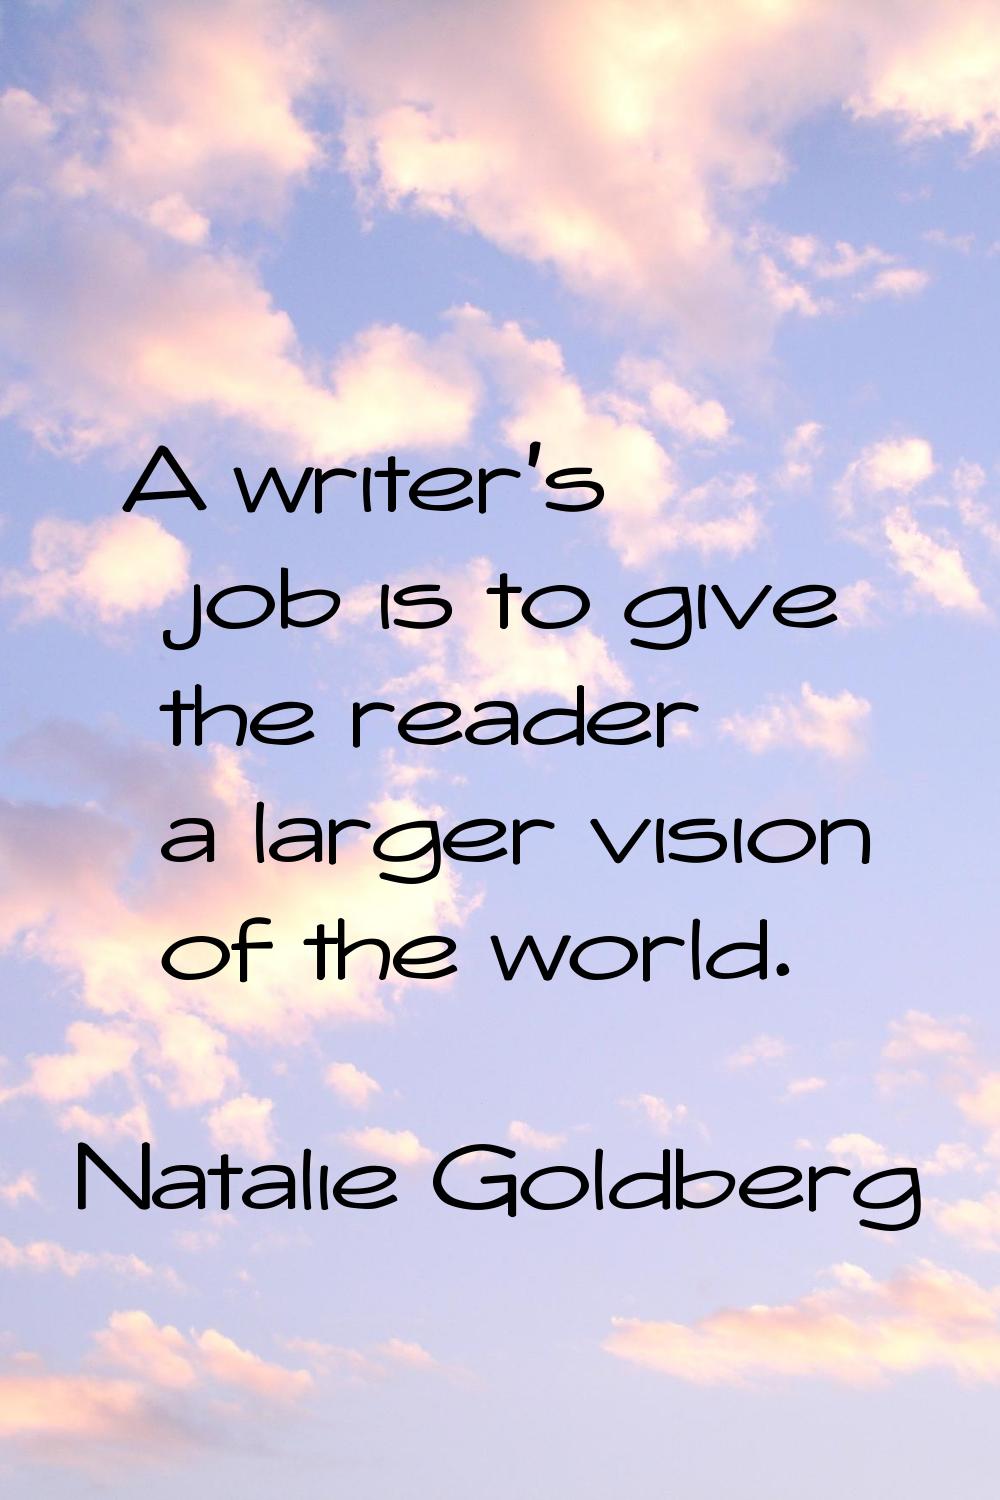 A writer's job is to give the reader a larger vision of the world.